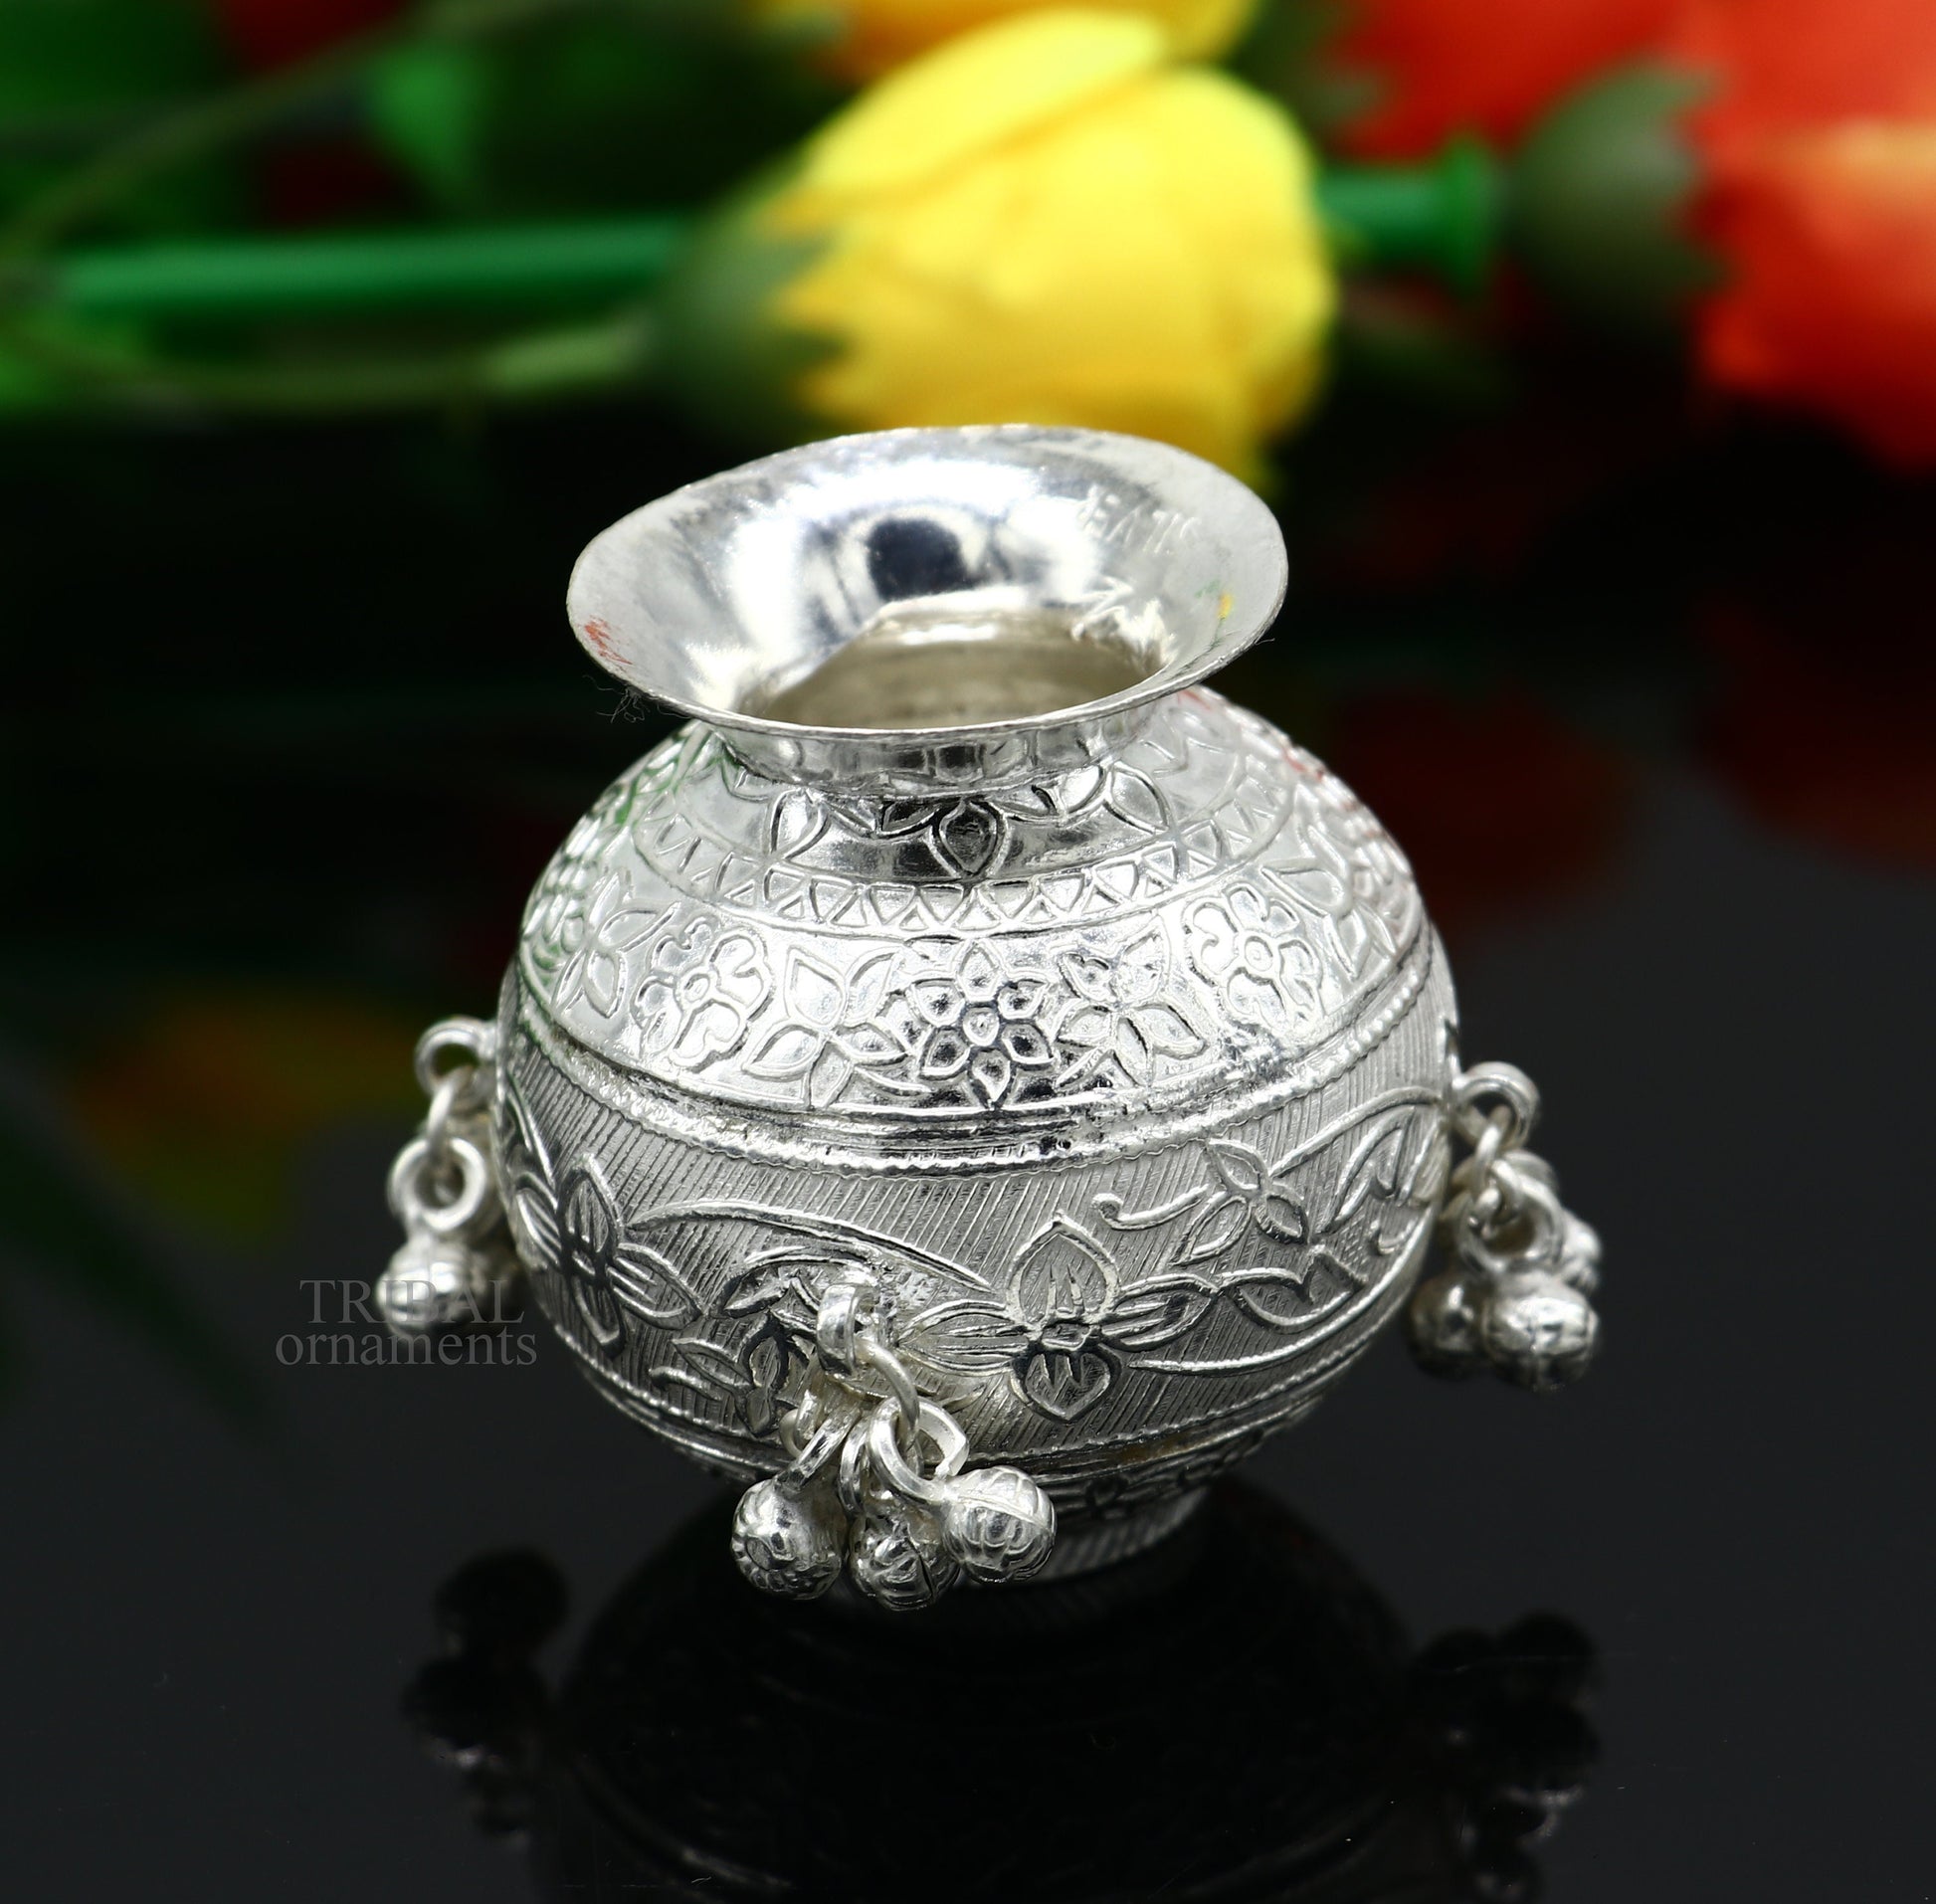 925 sterling silver handmade plain small Kalash or pot, unique special silver puja article, water or milk kalash pot india su703 - TRIBAL ORNAMENTS